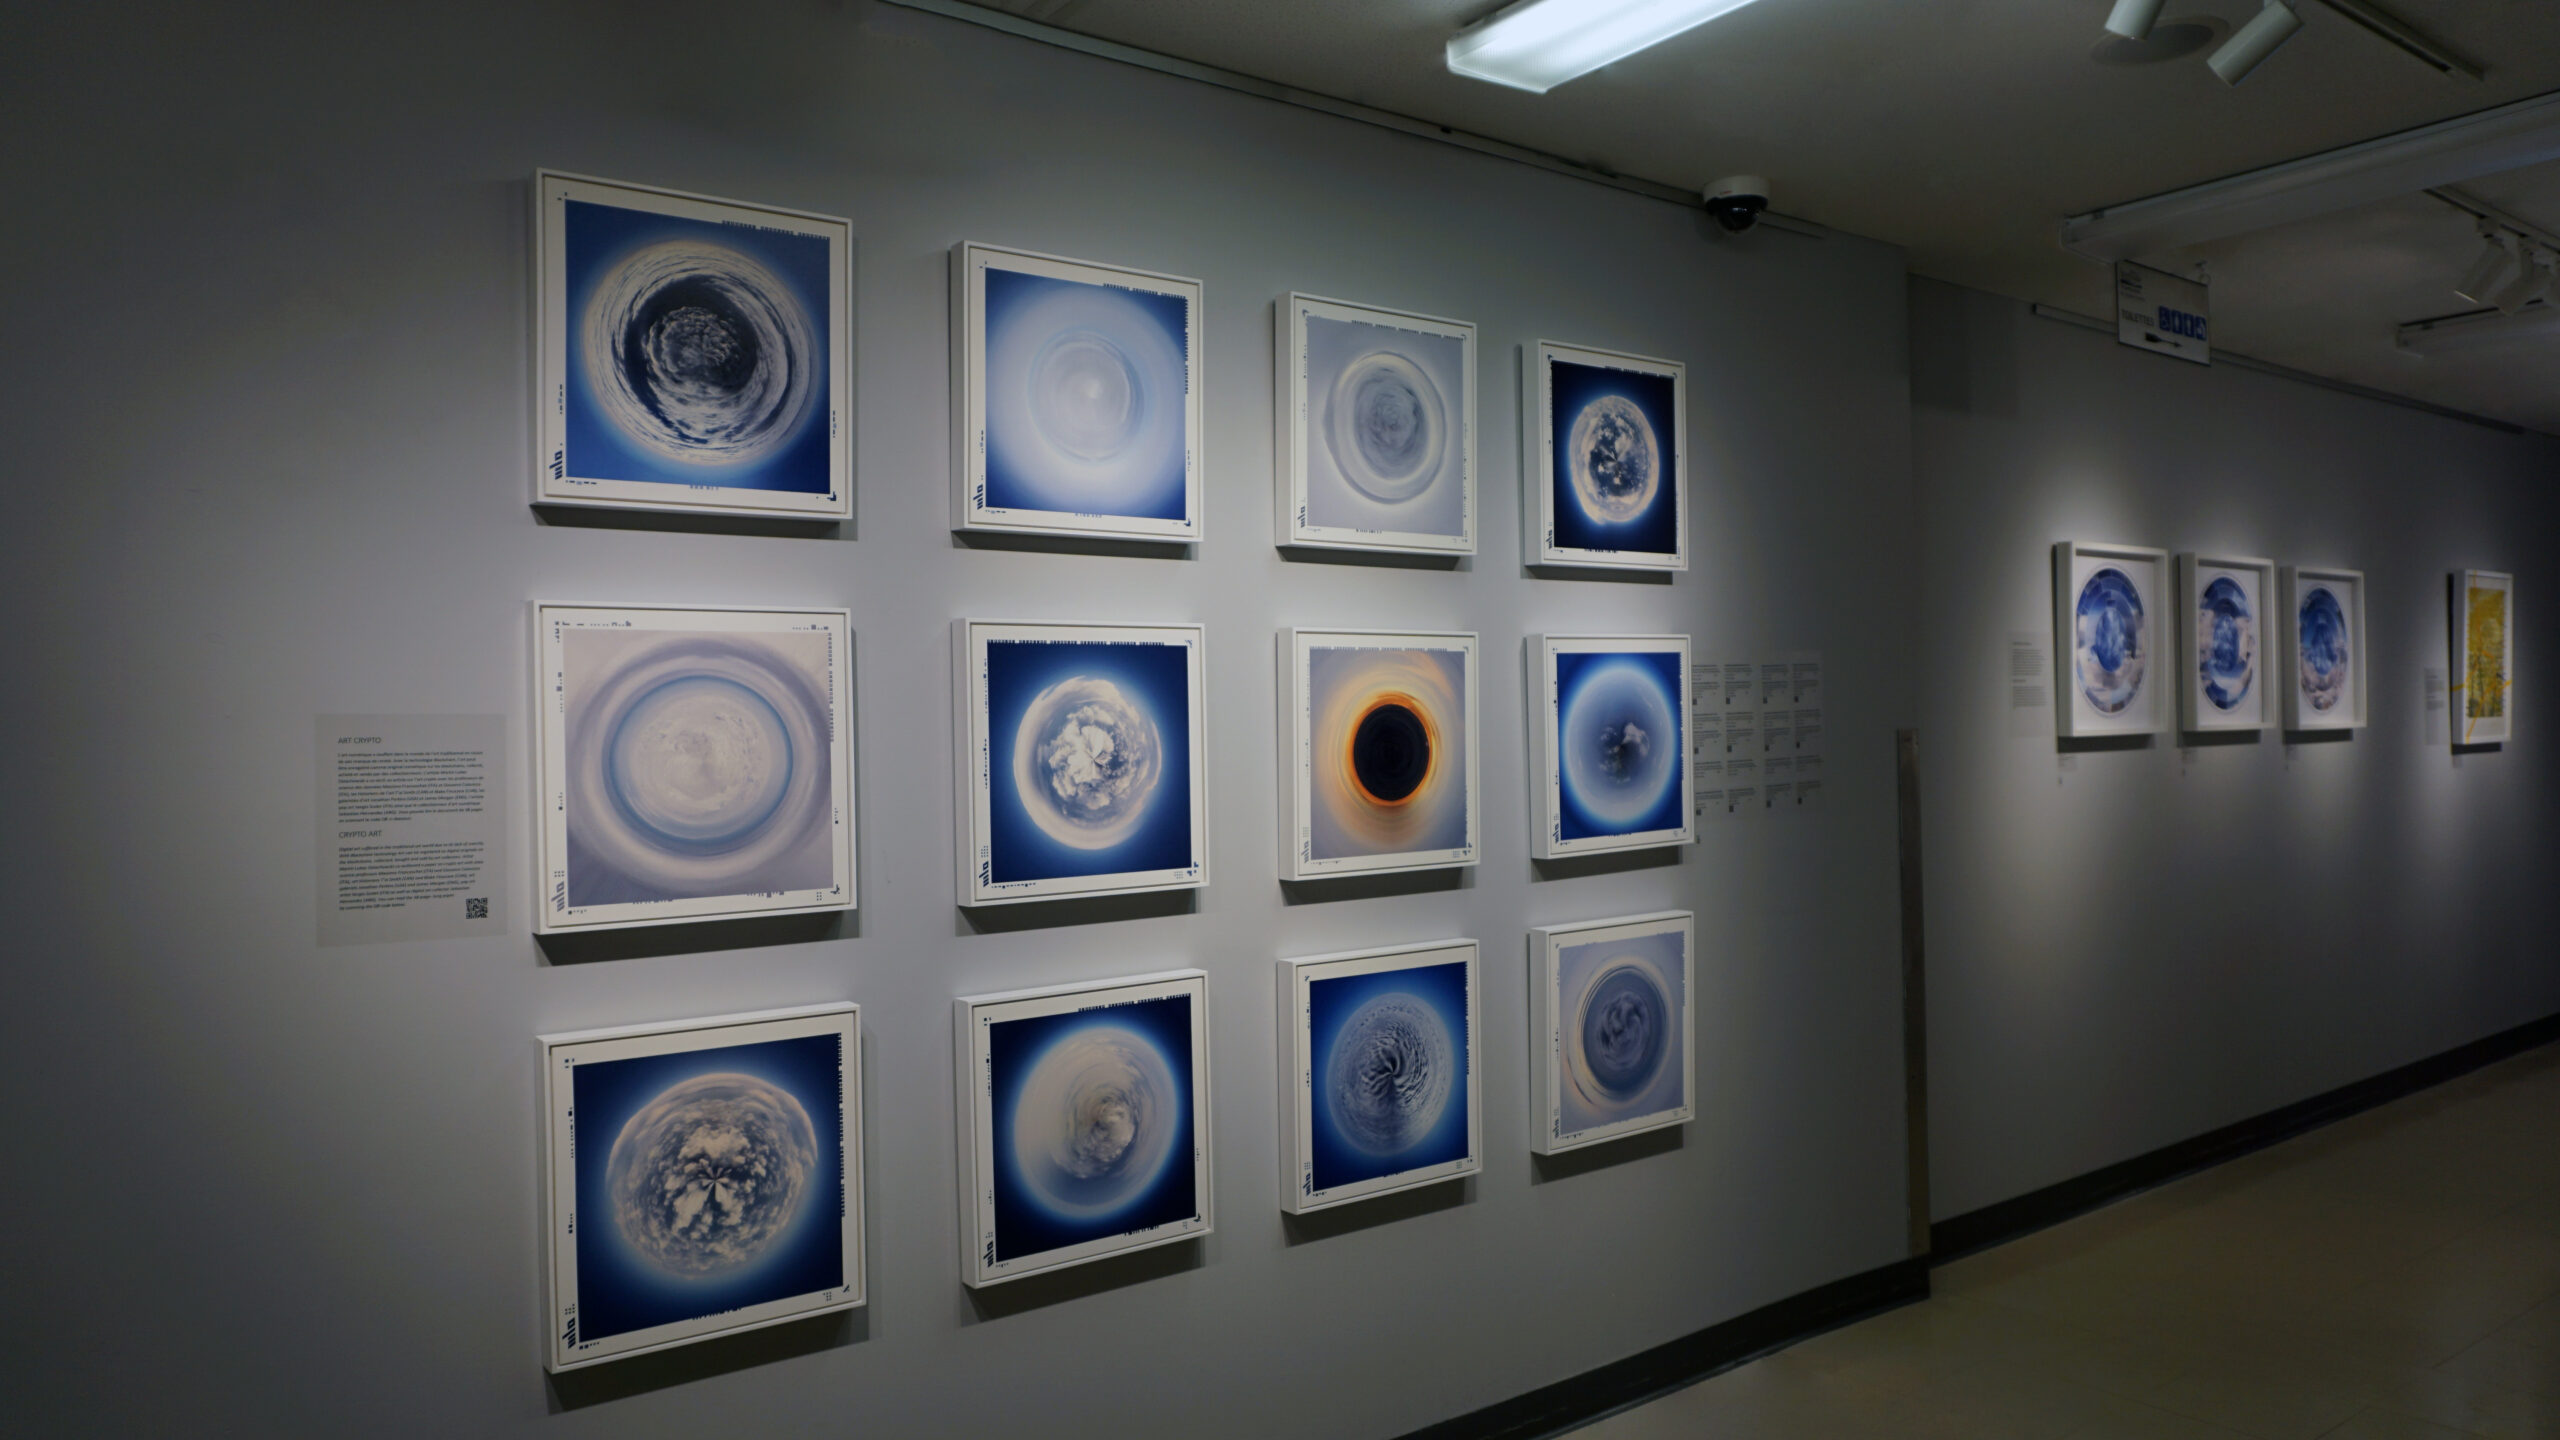 Installation Tokenized Cloud Spheres during my solo exhibition entitled: Tropopause Contemplation in Sherbrooke, QC